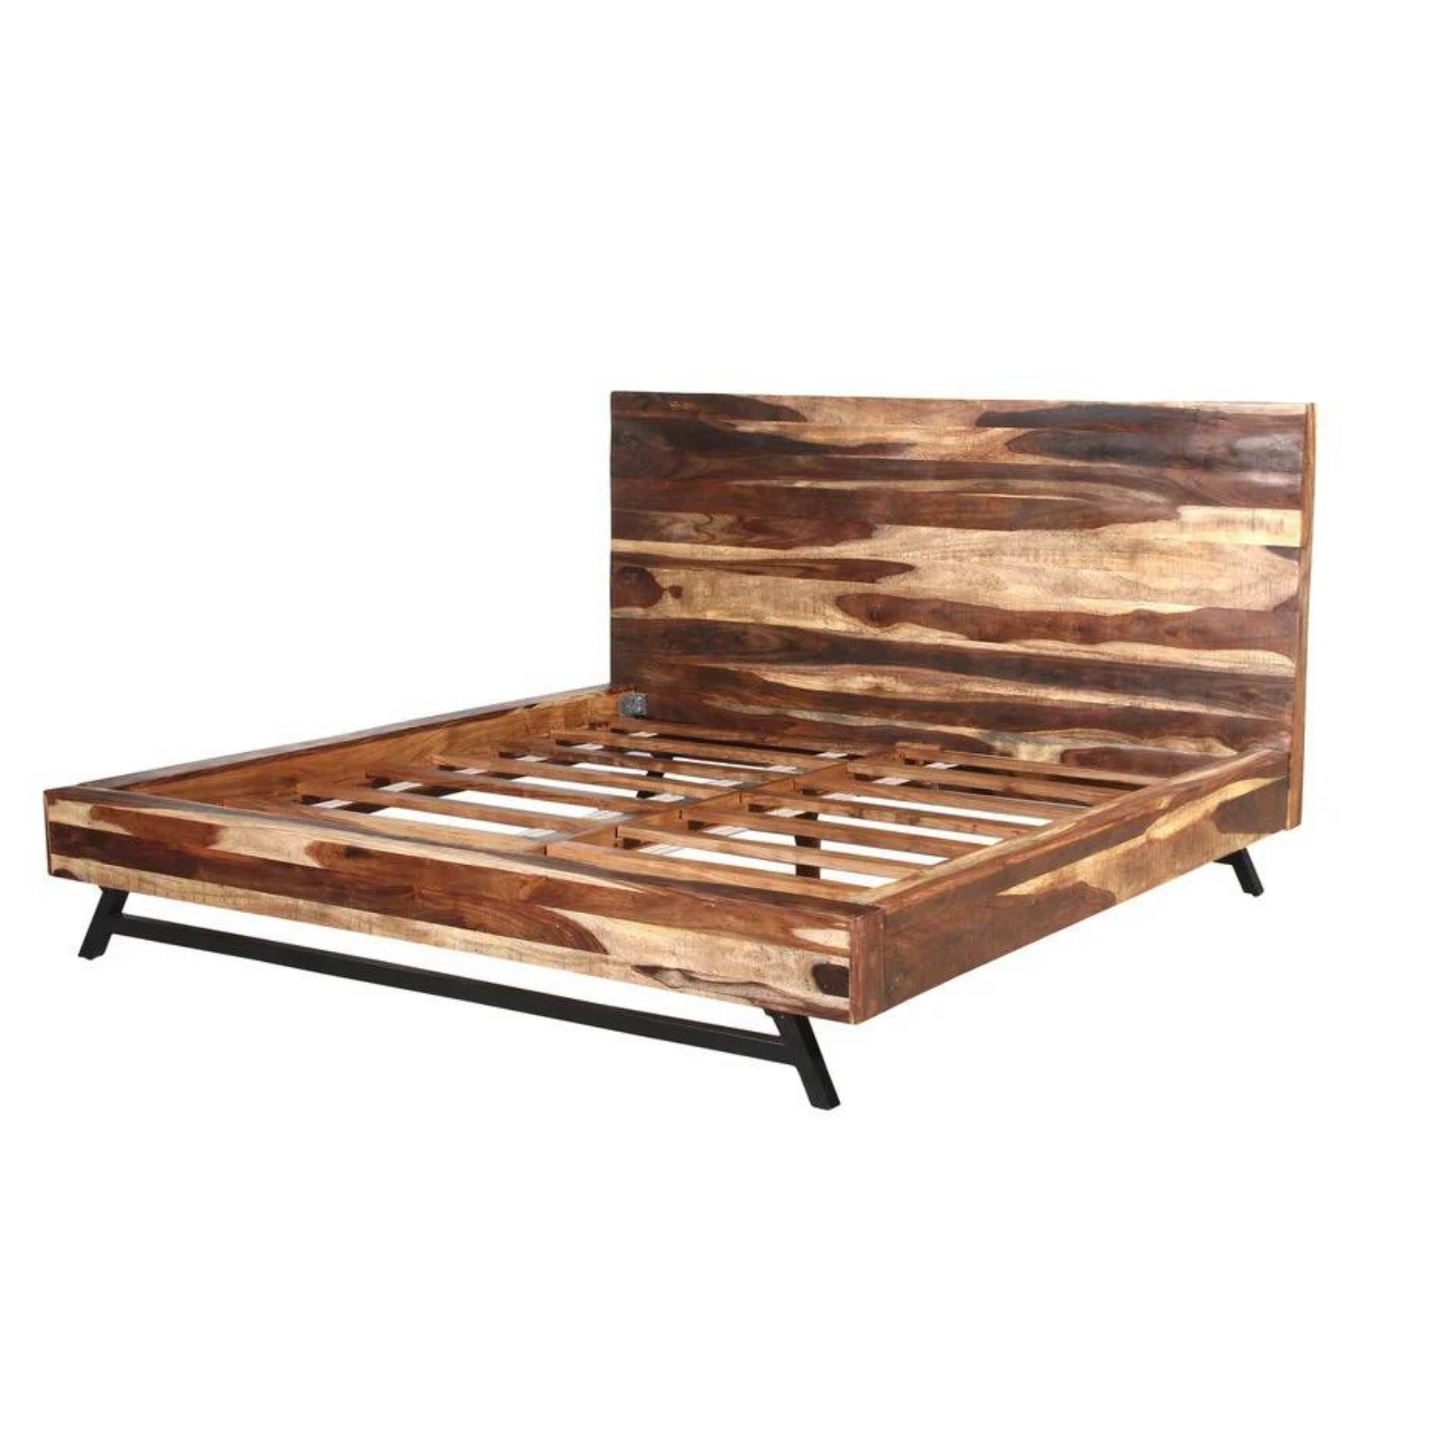 The bed frame with tall panel is made of sheesham wood. The bed frame comes with sturdy black metal legs.